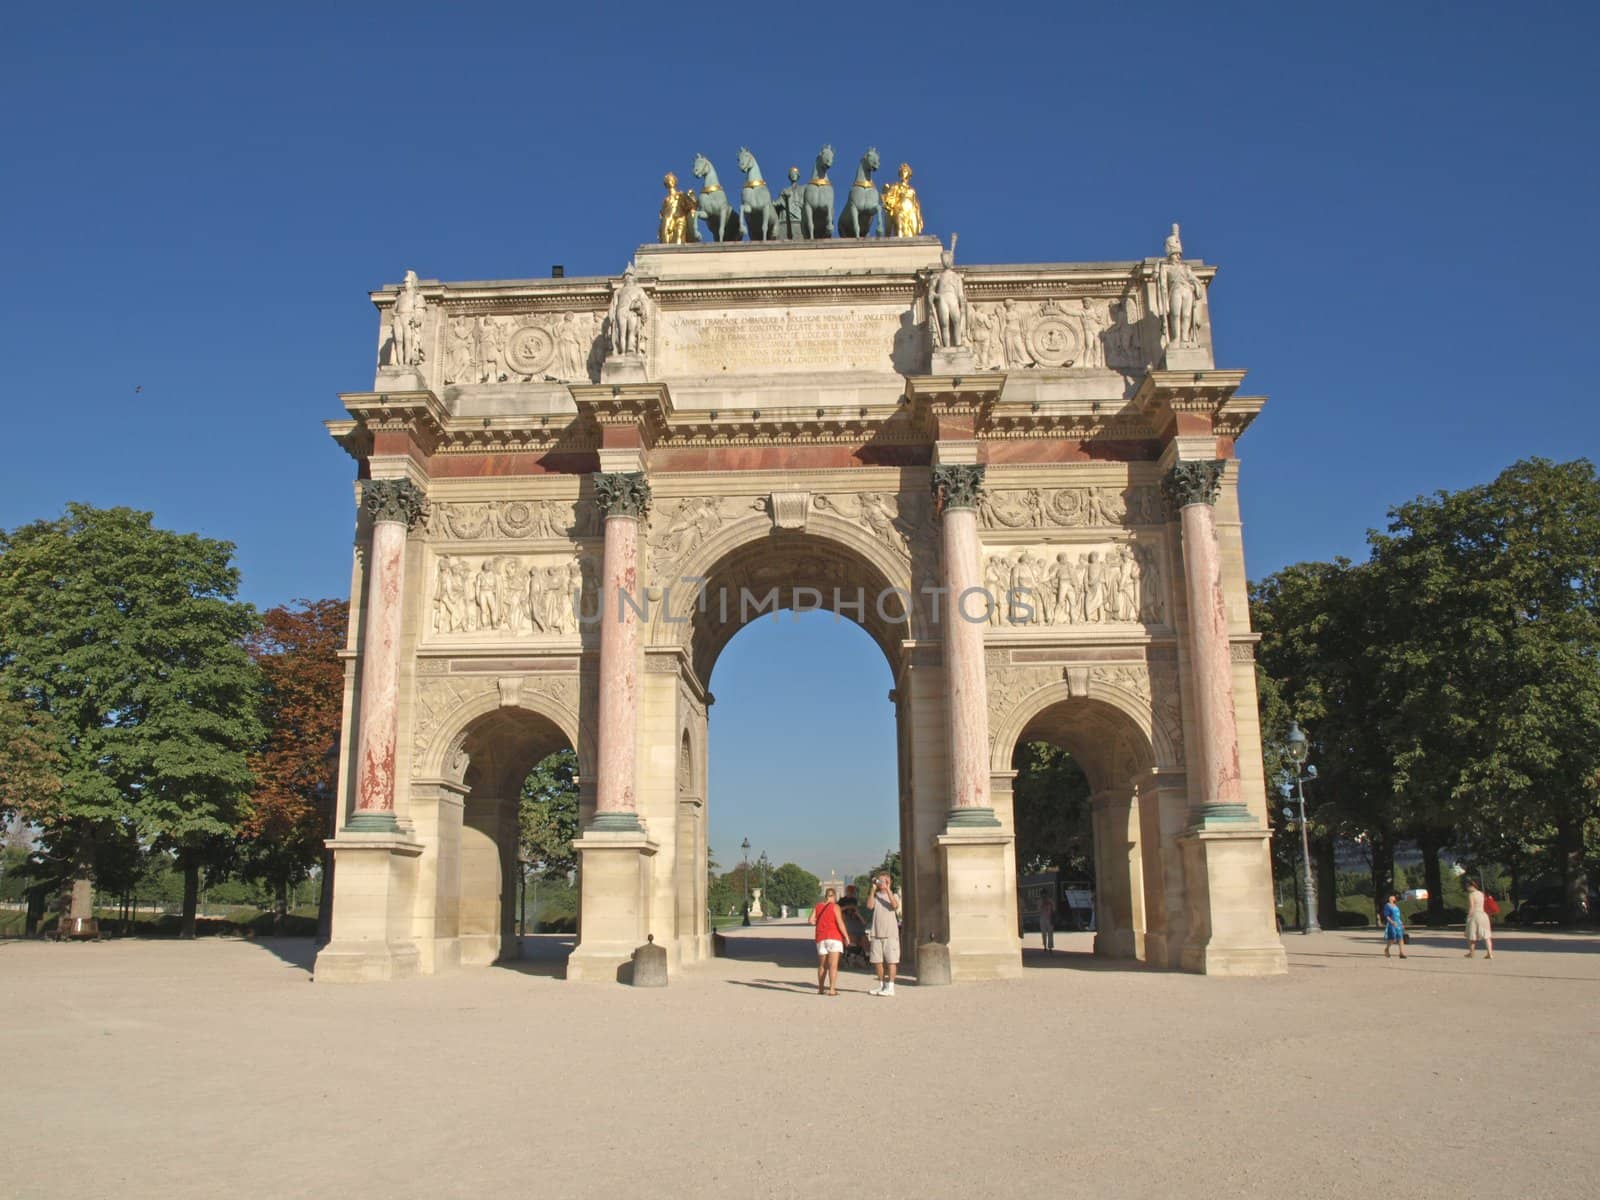 The Triump Arch at the Louvre Carrousel Square in Paris